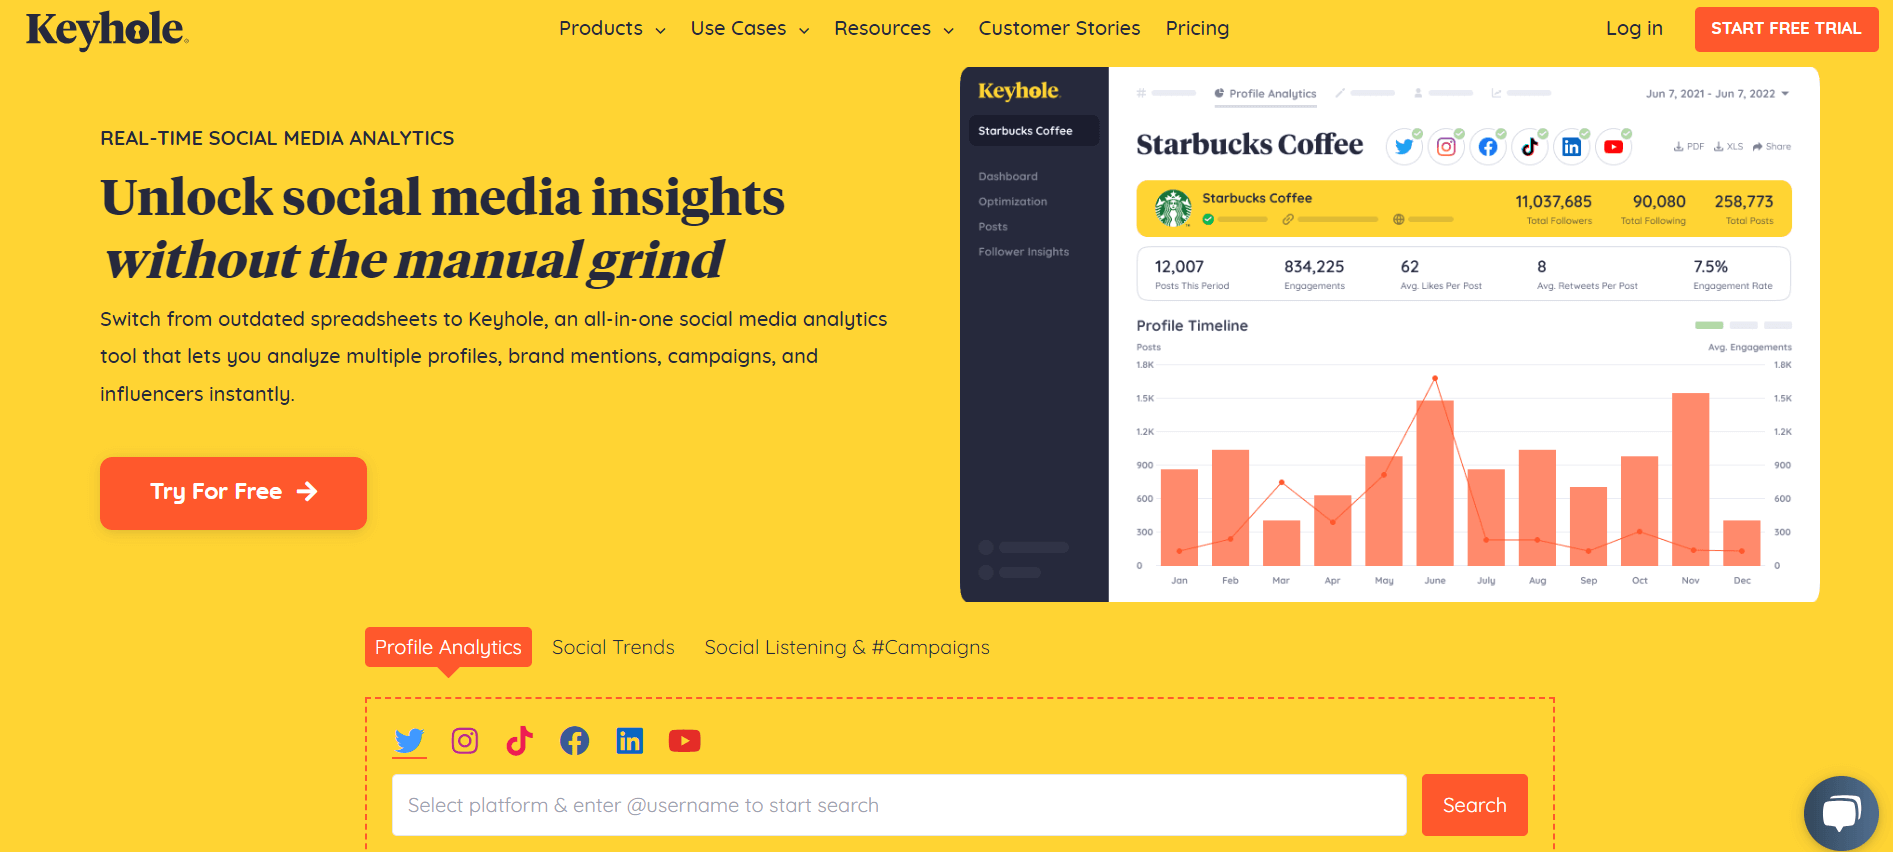 Webpage of Keyhole featuring a headline about automating social media insights and a graphical display of Starbucks Coffee social media analytics.